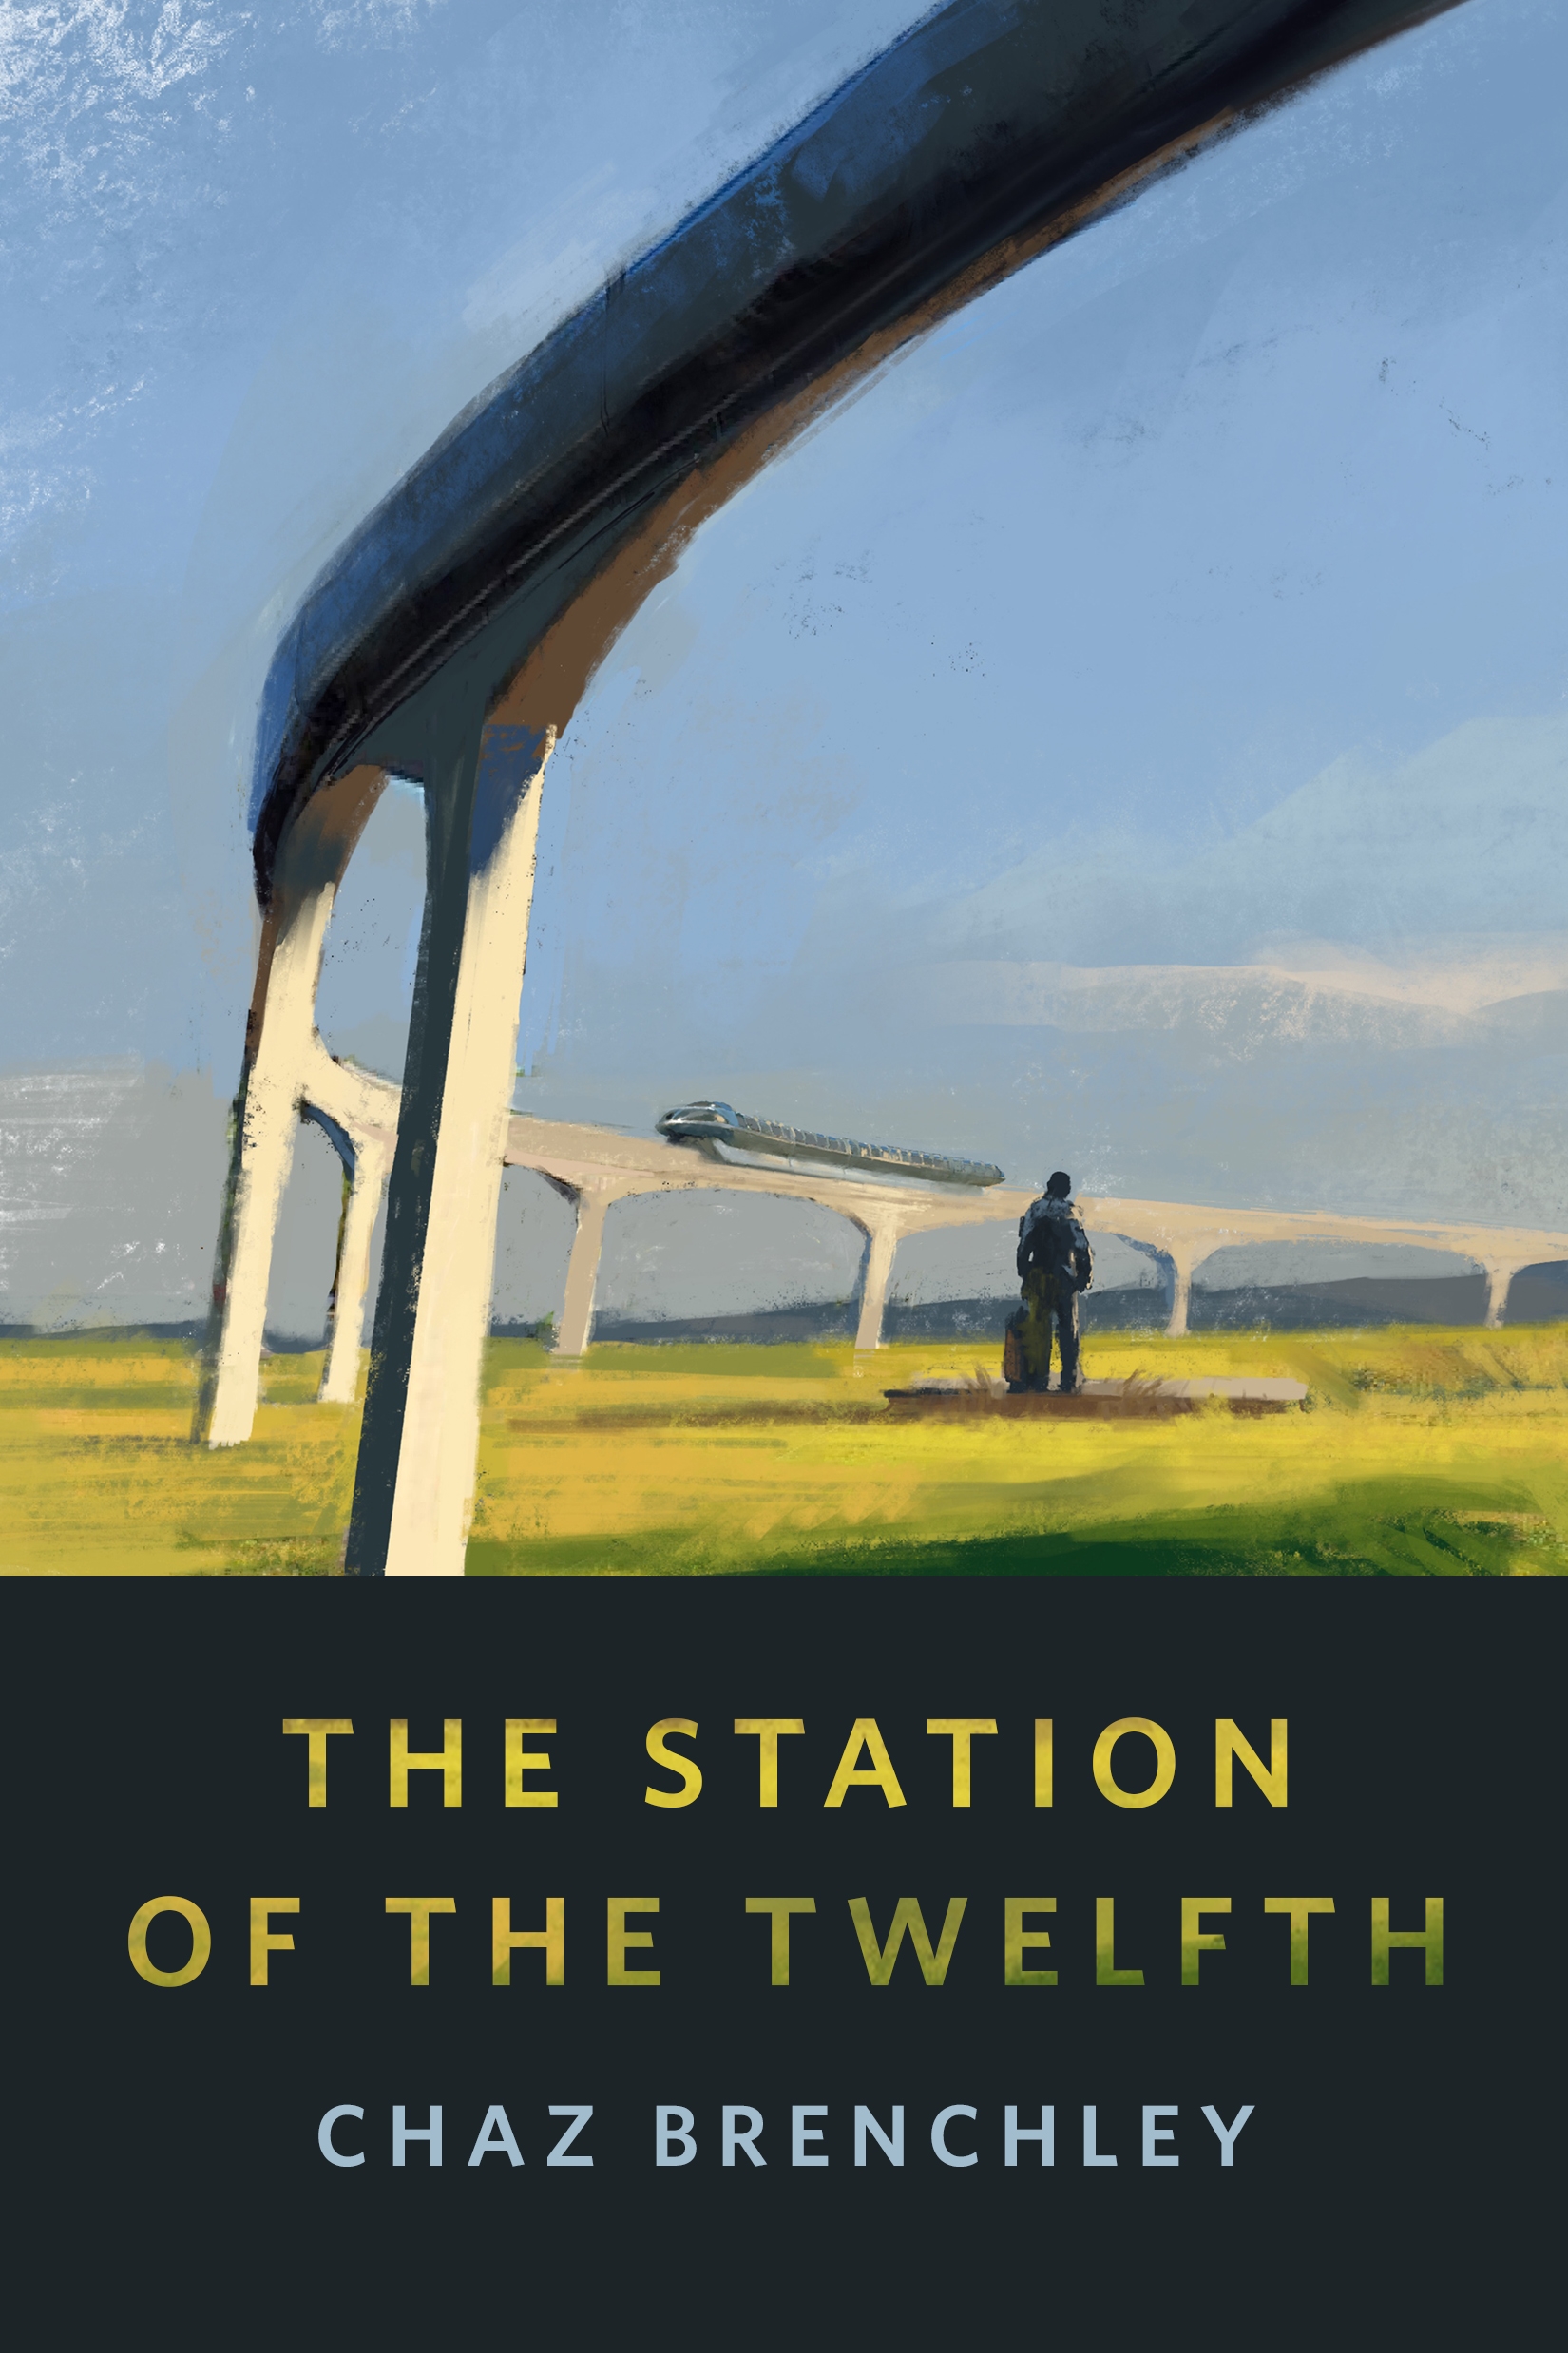 The Station of the Twelfth : A Tor.com Original by Chaz Brenchley